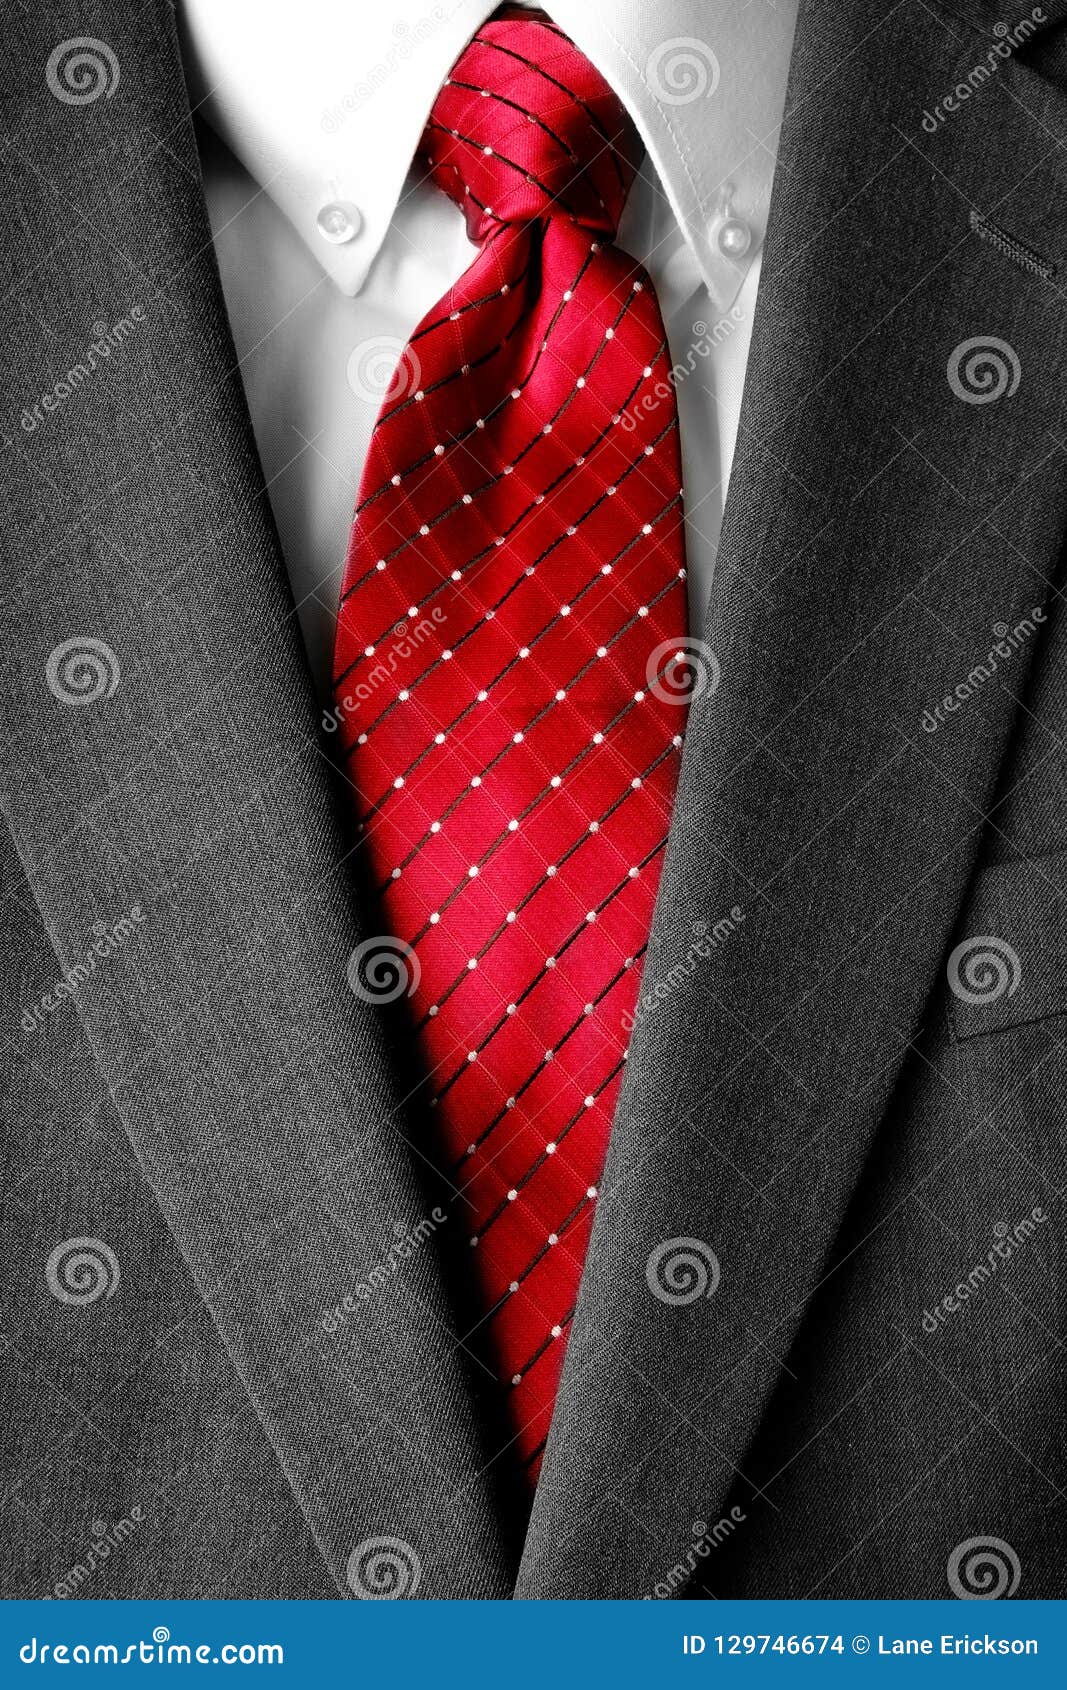 White Shirt and Red Tie Combination